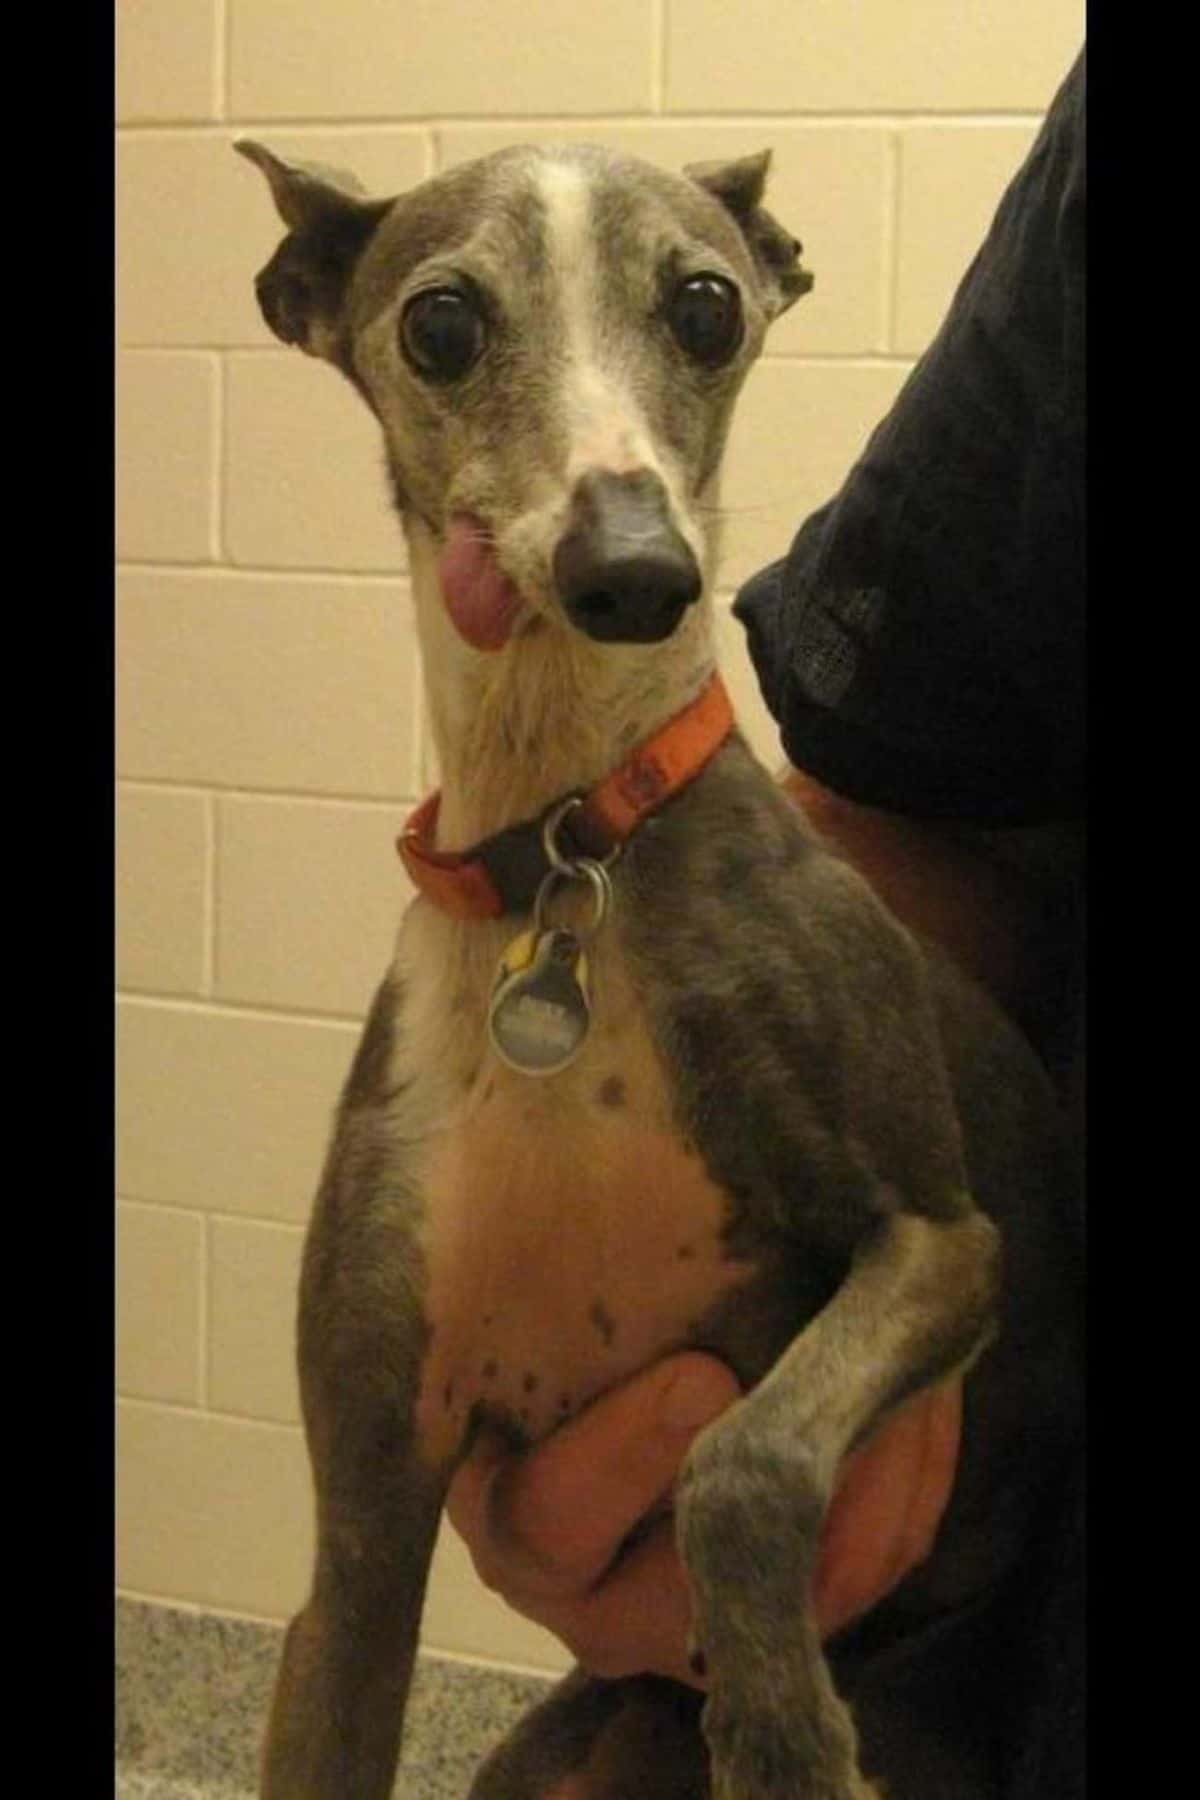 grey and white italian greyhound being held by someone while it is sticking its tongue out slightly